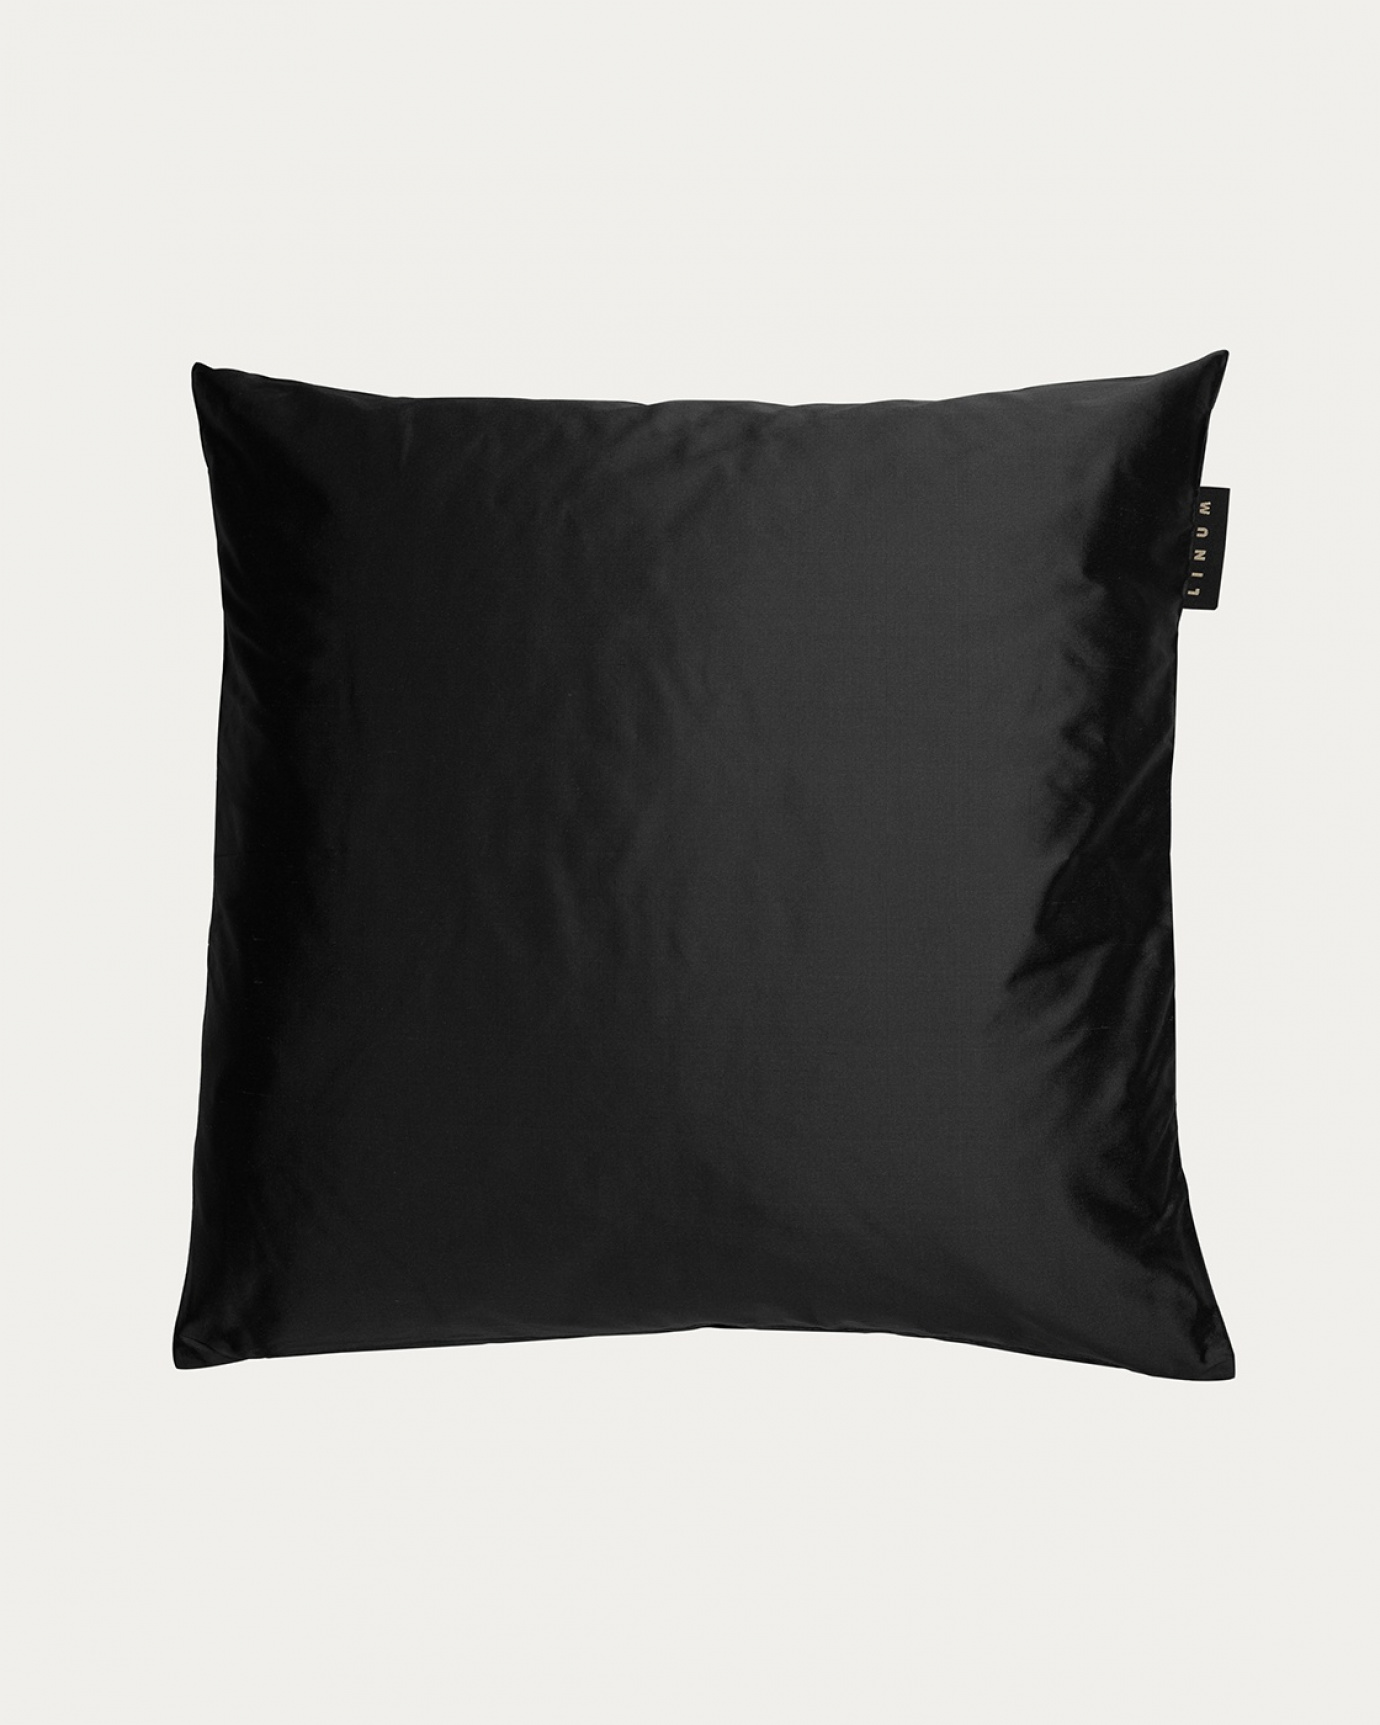 Product image black SILK cushion cover made of 100% dupion silk that gives a nice lustre from LINUM DESIGN. Size 50x50 cm.